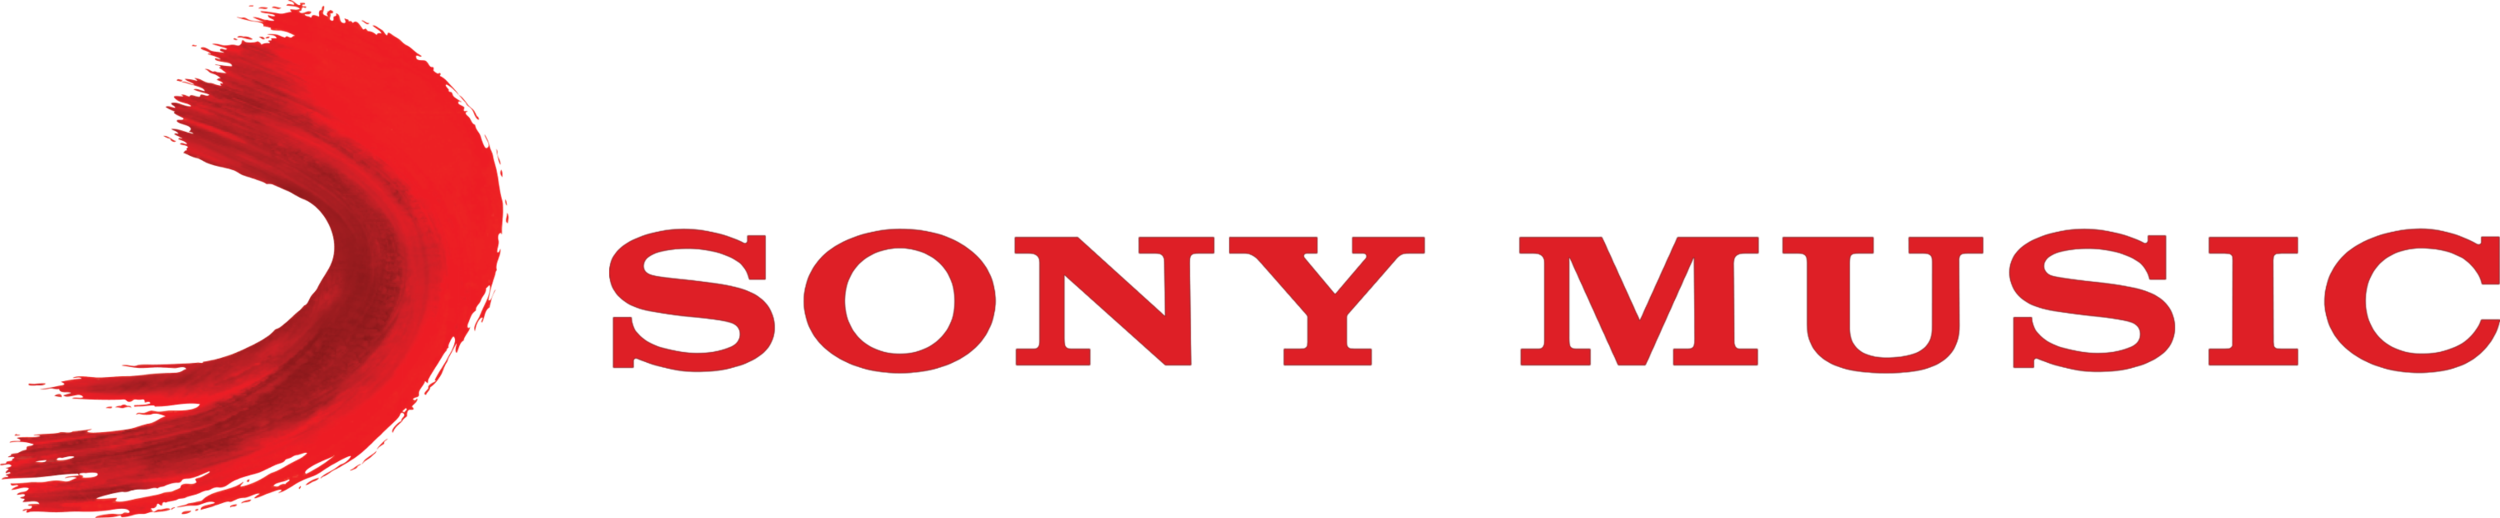 Sony_Music_Entertainment_Logo_(2009)_II copy.png